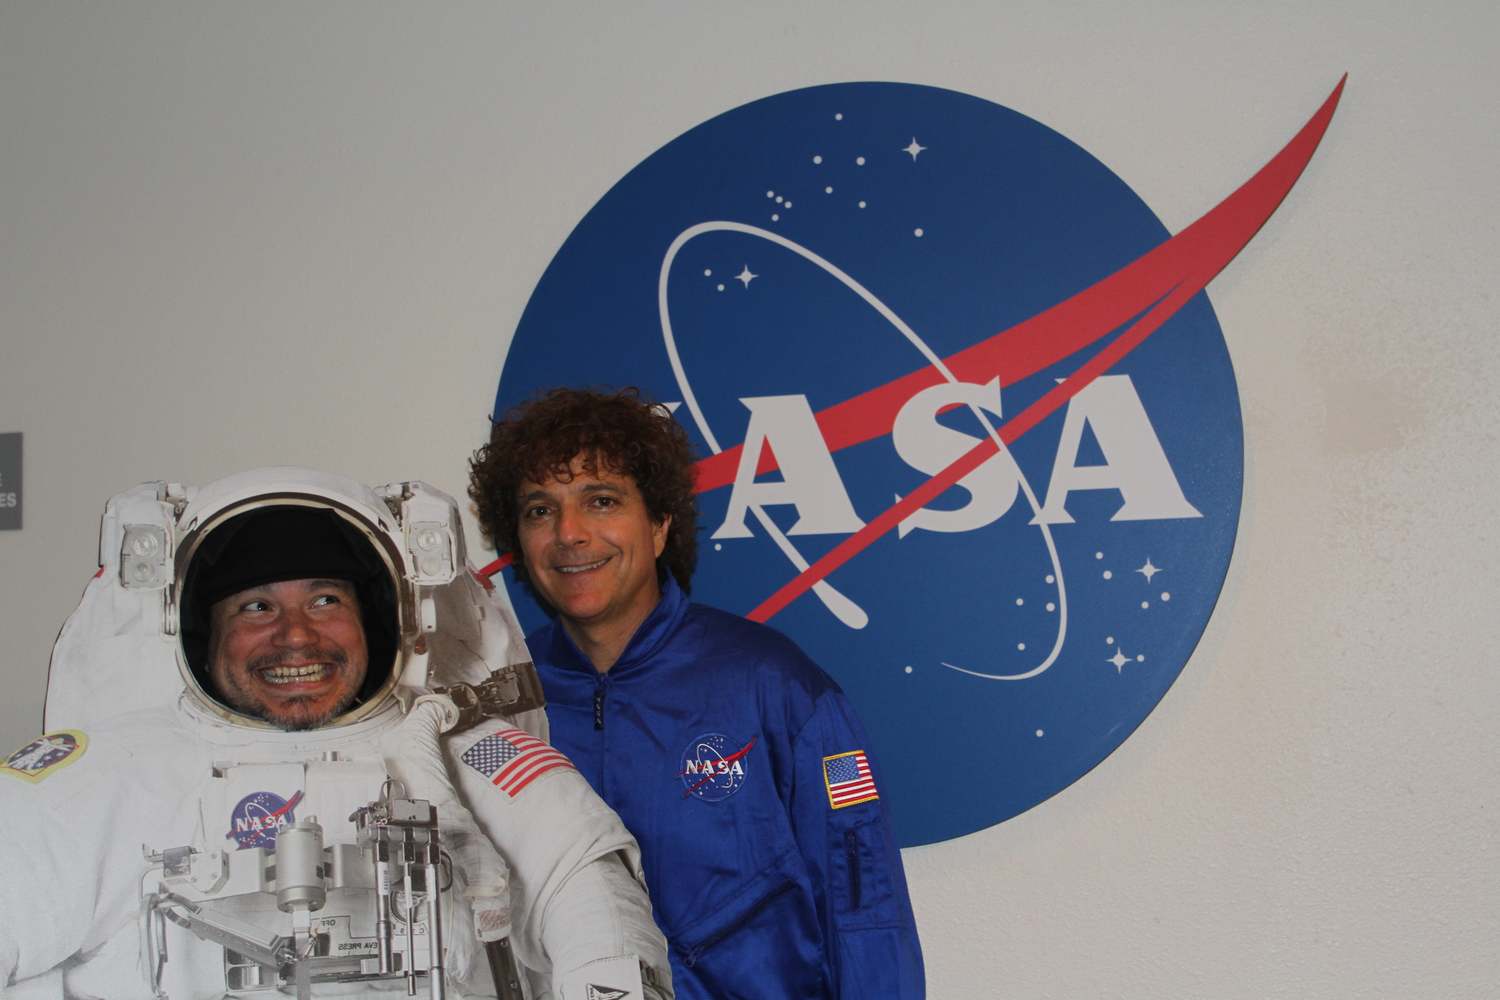 Asdru Sierra of Ozomatli (left) in an astronaut suit and Anthony Marinelli (right) in a flight-suit, at the NASA Ames, Conrad Foundation Spirit of Innovation Summit, Mountain View, CA, March, 2012.